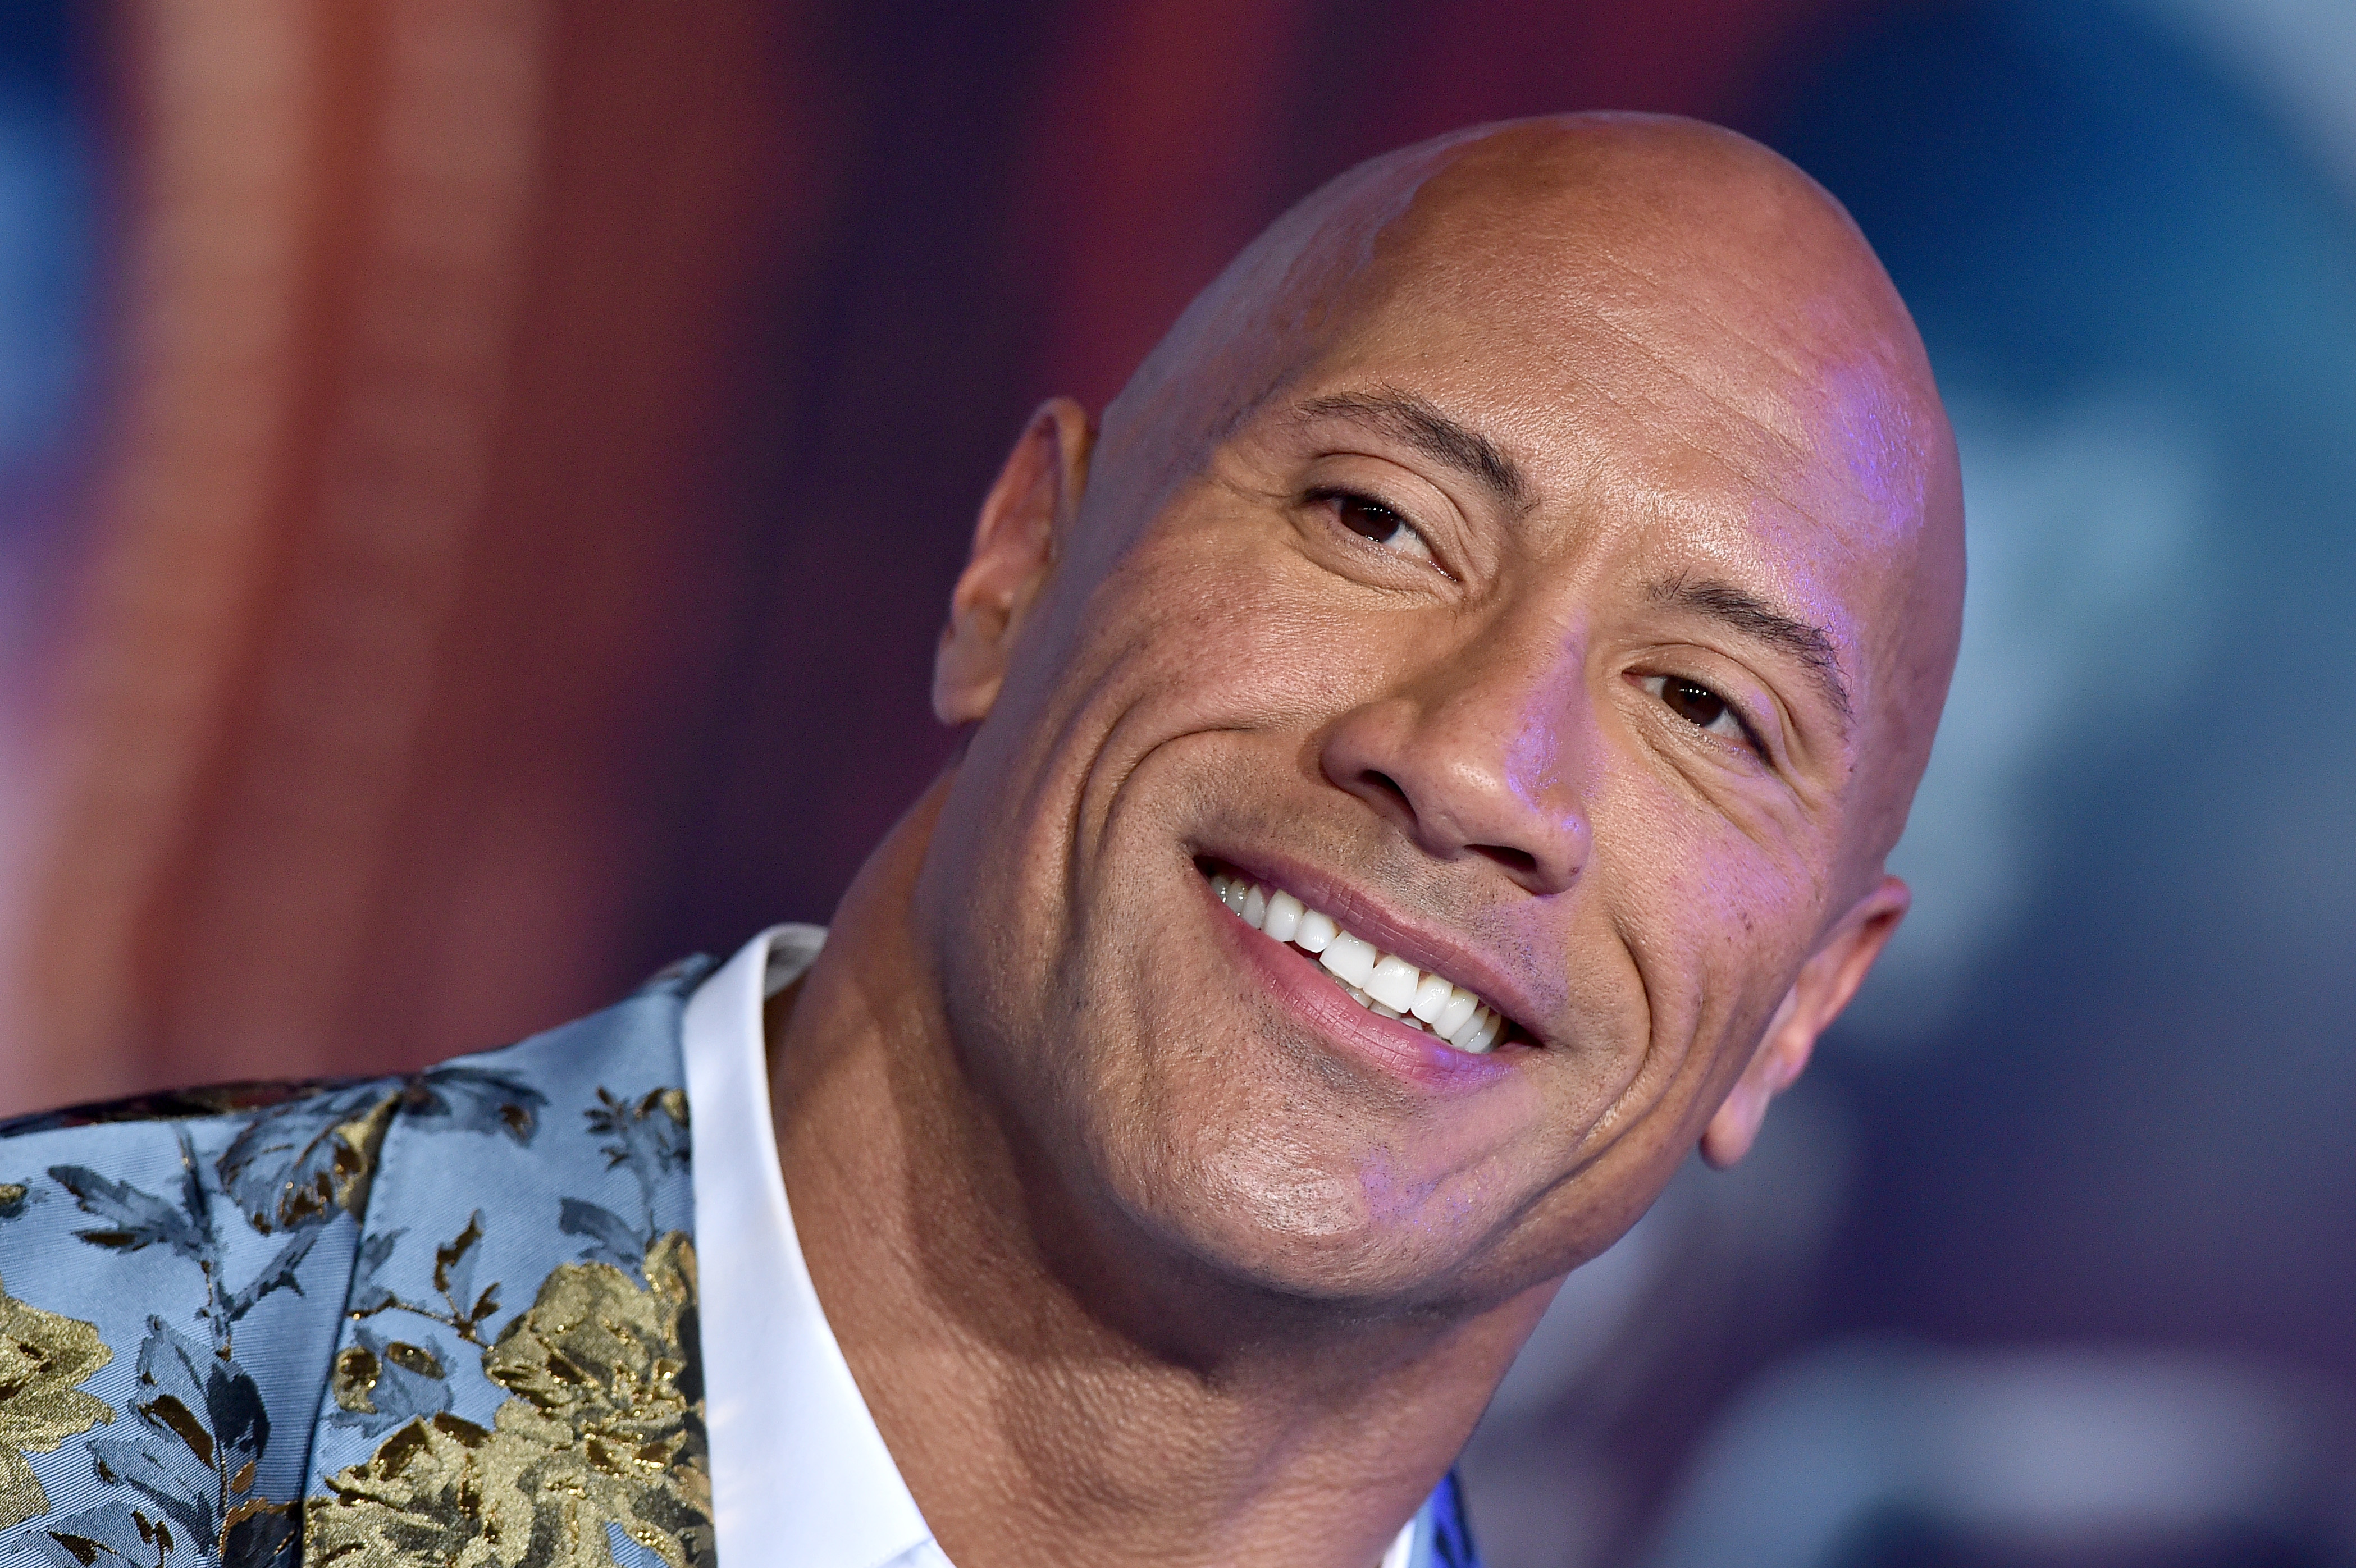 Dwayne Johnson attends the premiere of Sony Pictures' "Jumanji: The Next Level" on December 09, 2019 in Hollywood, California. (Axelle -- Bauer-Griffin/FilmMagic/Getty Images)